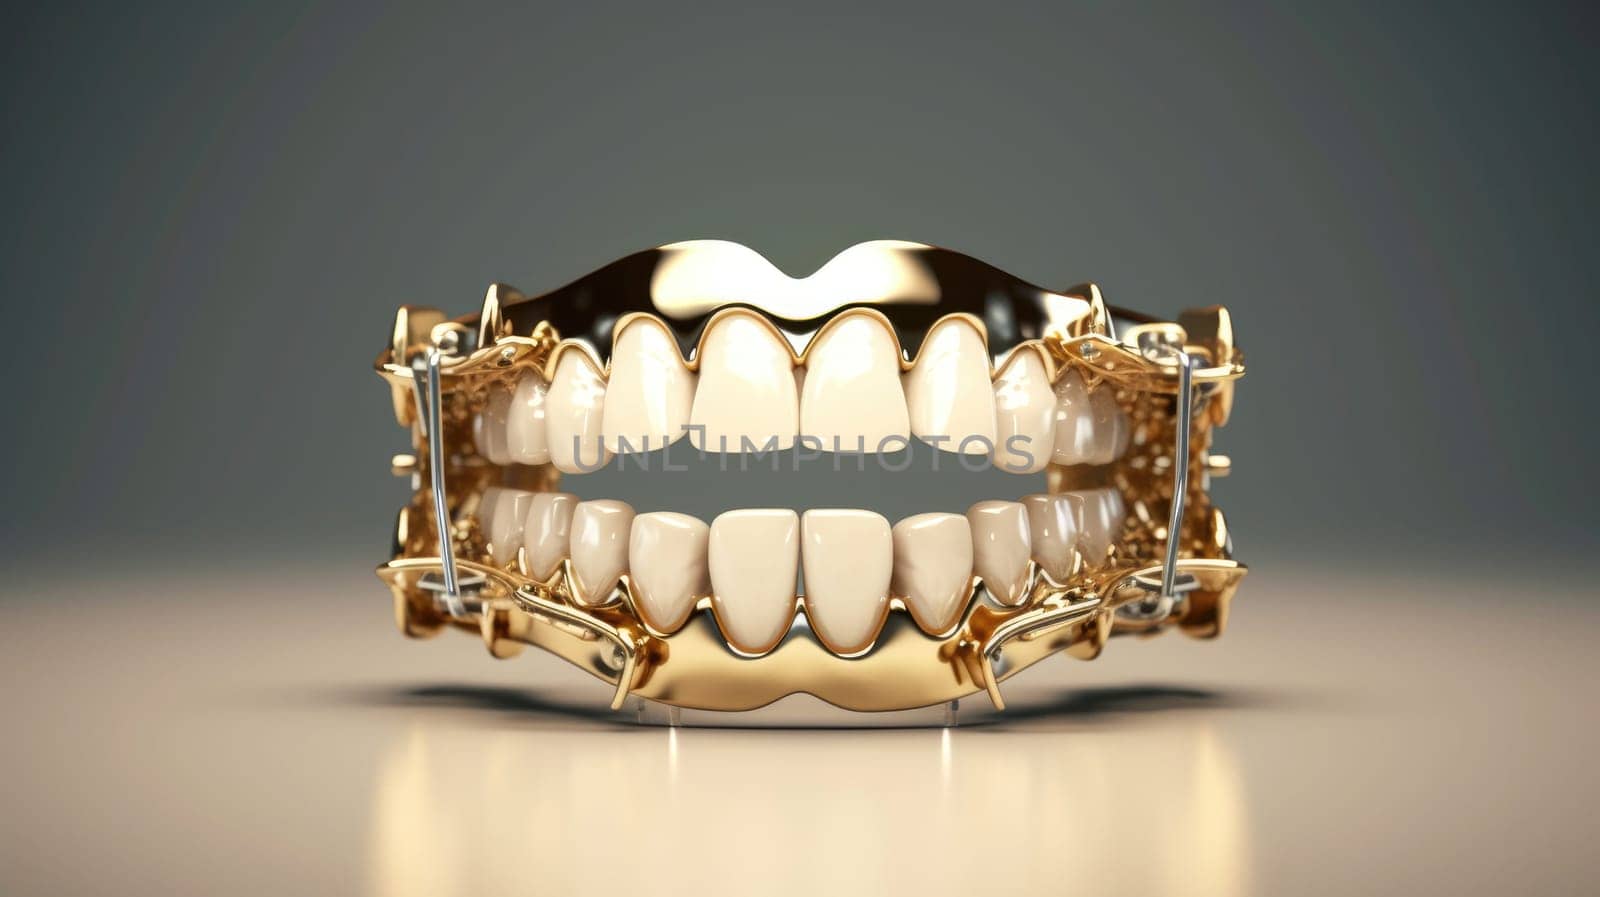 Artificial denture teeth with gold gums, acrylic human jaw model on white table on grey background. Plastic artificial human teeth for studying oral hygiene in the dental clinic. by JuliaDorian